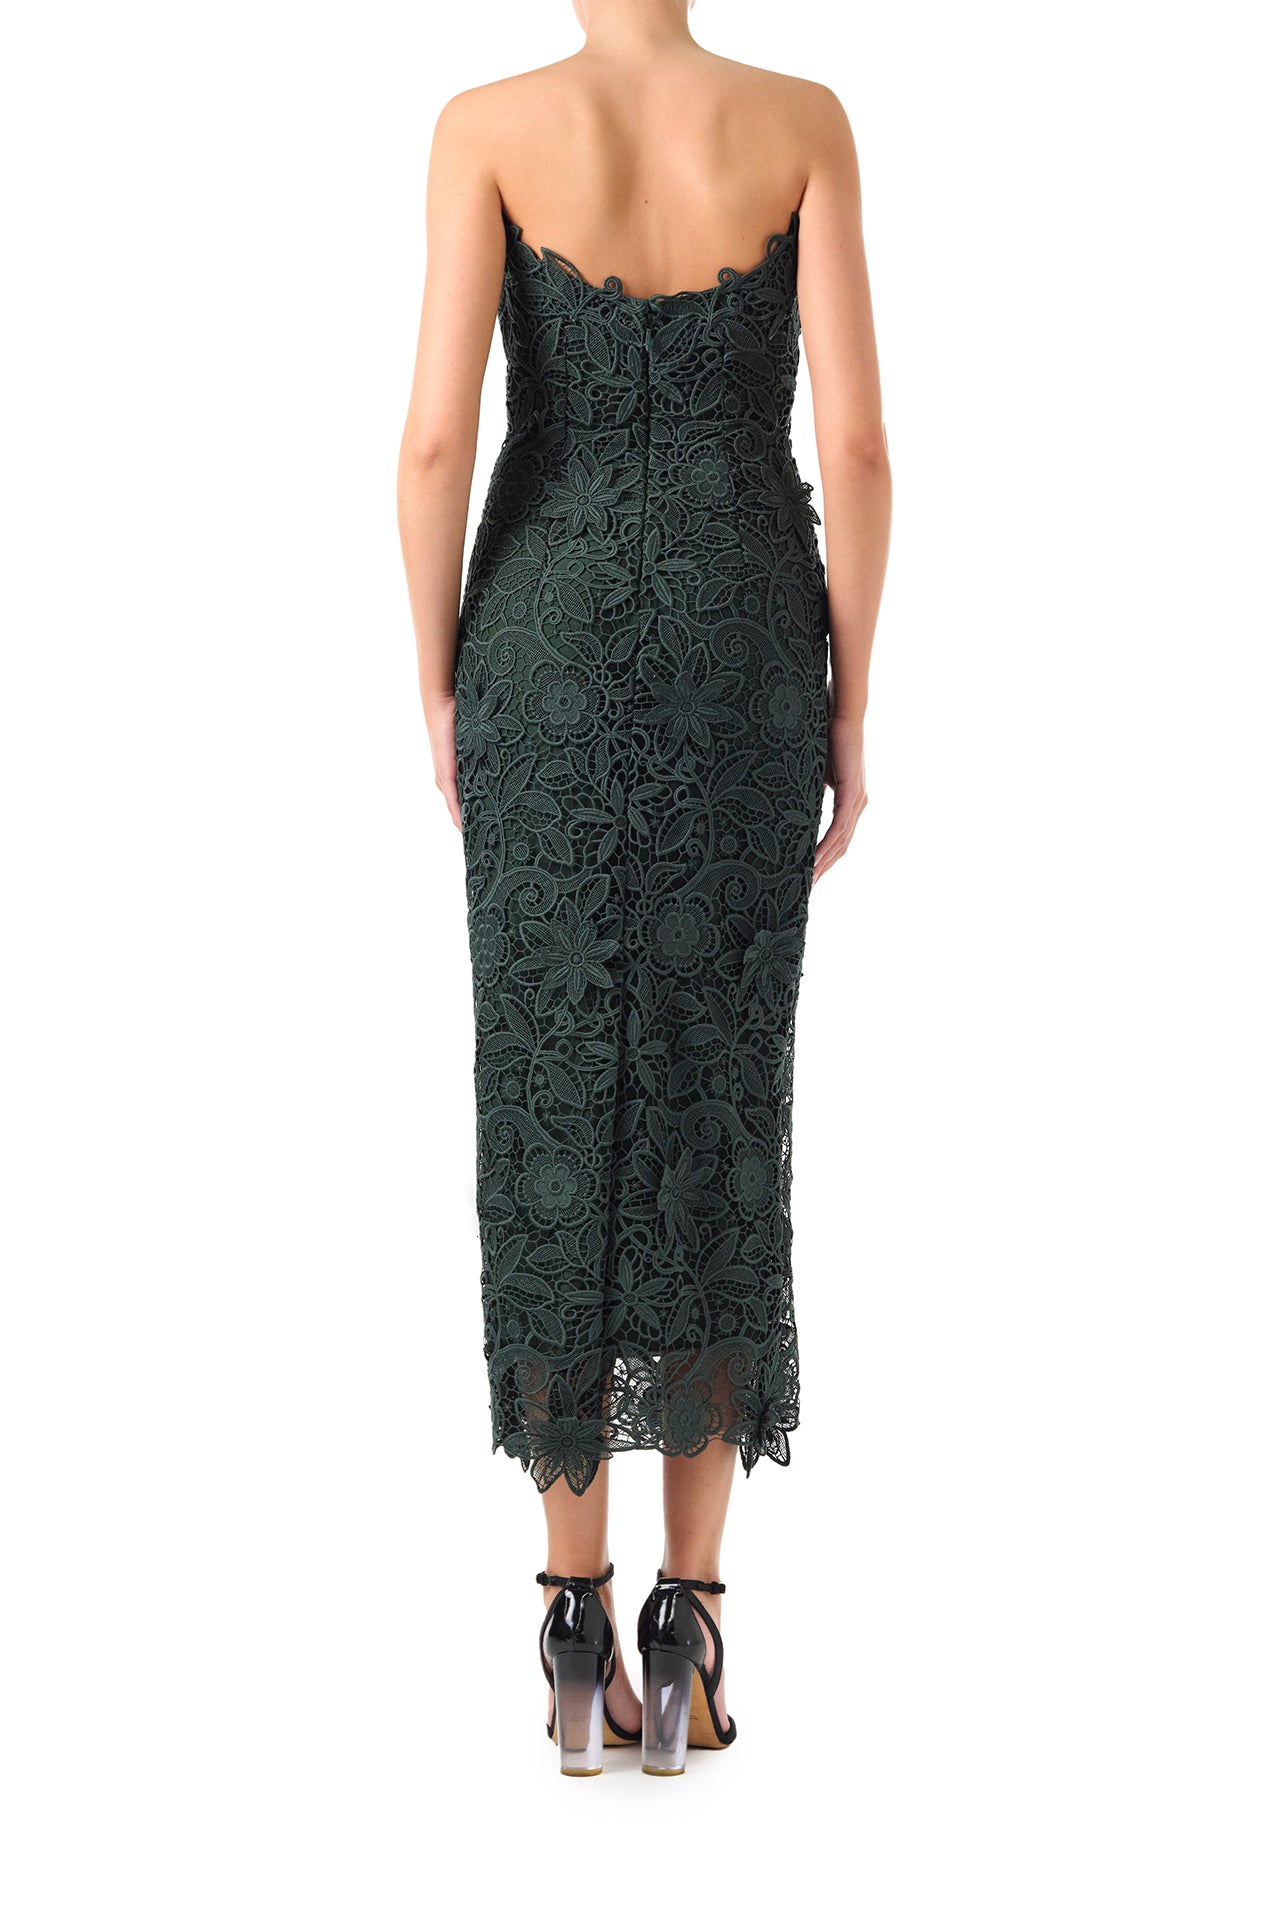 Monique Lhuillier Fall 2024 Strapless, Juniper lace sheath dress with lace scalloped neckline and hem - back.